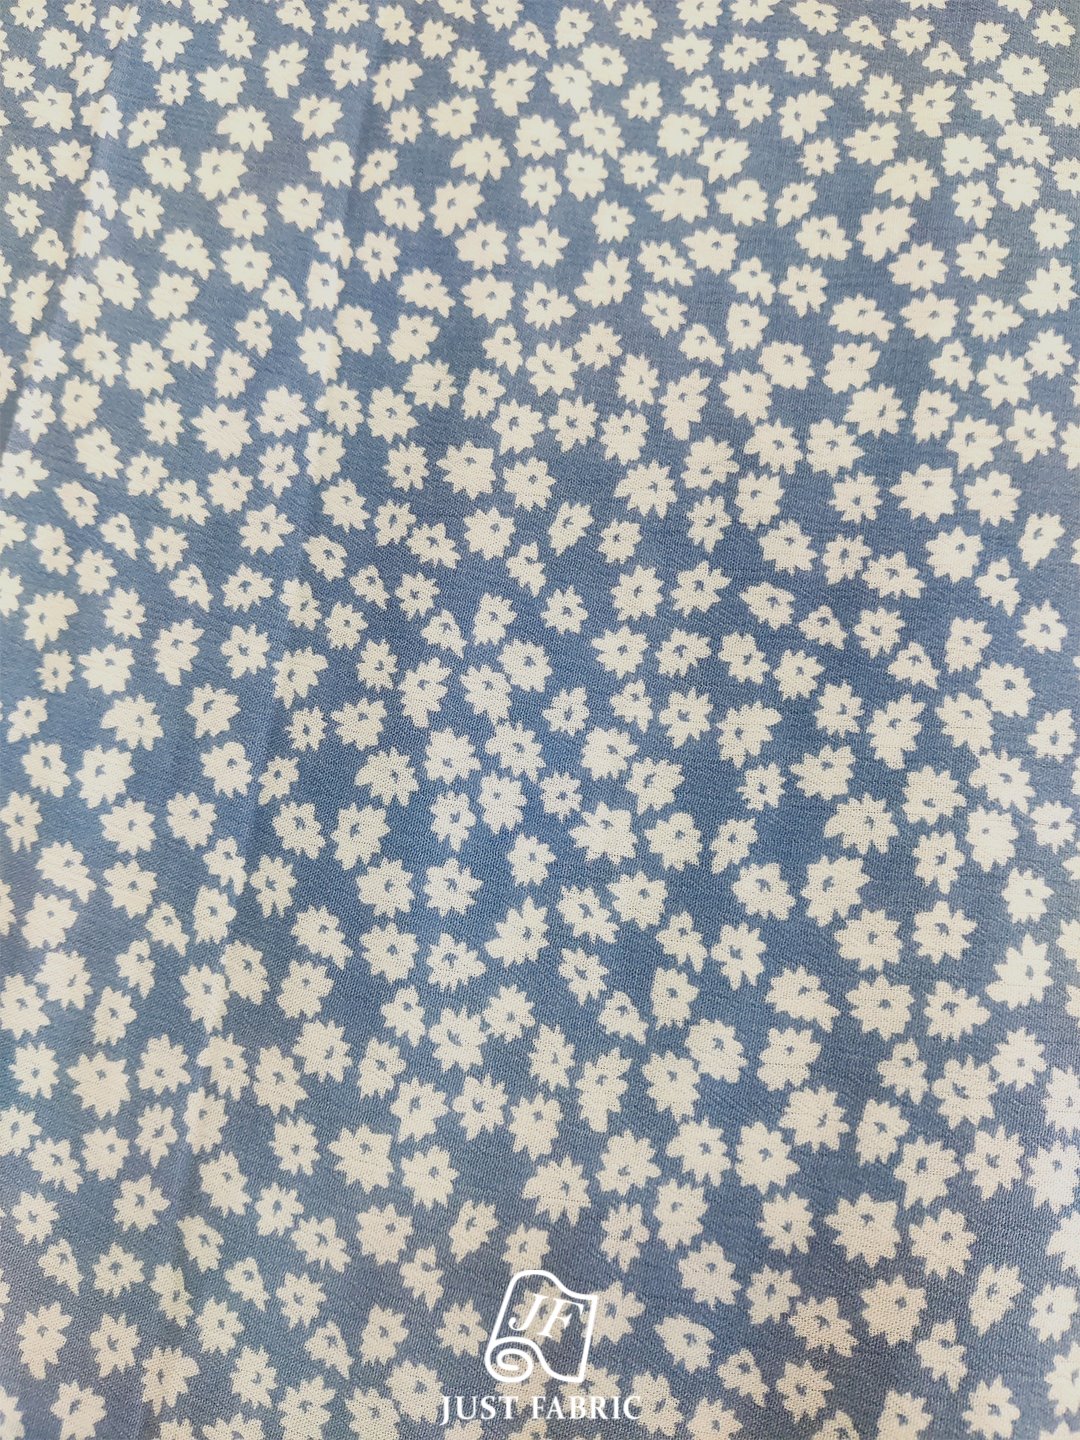 Floral Print All over on Rayon Cotton Fabric  ( 60" Inch Width) JUST FABRIC